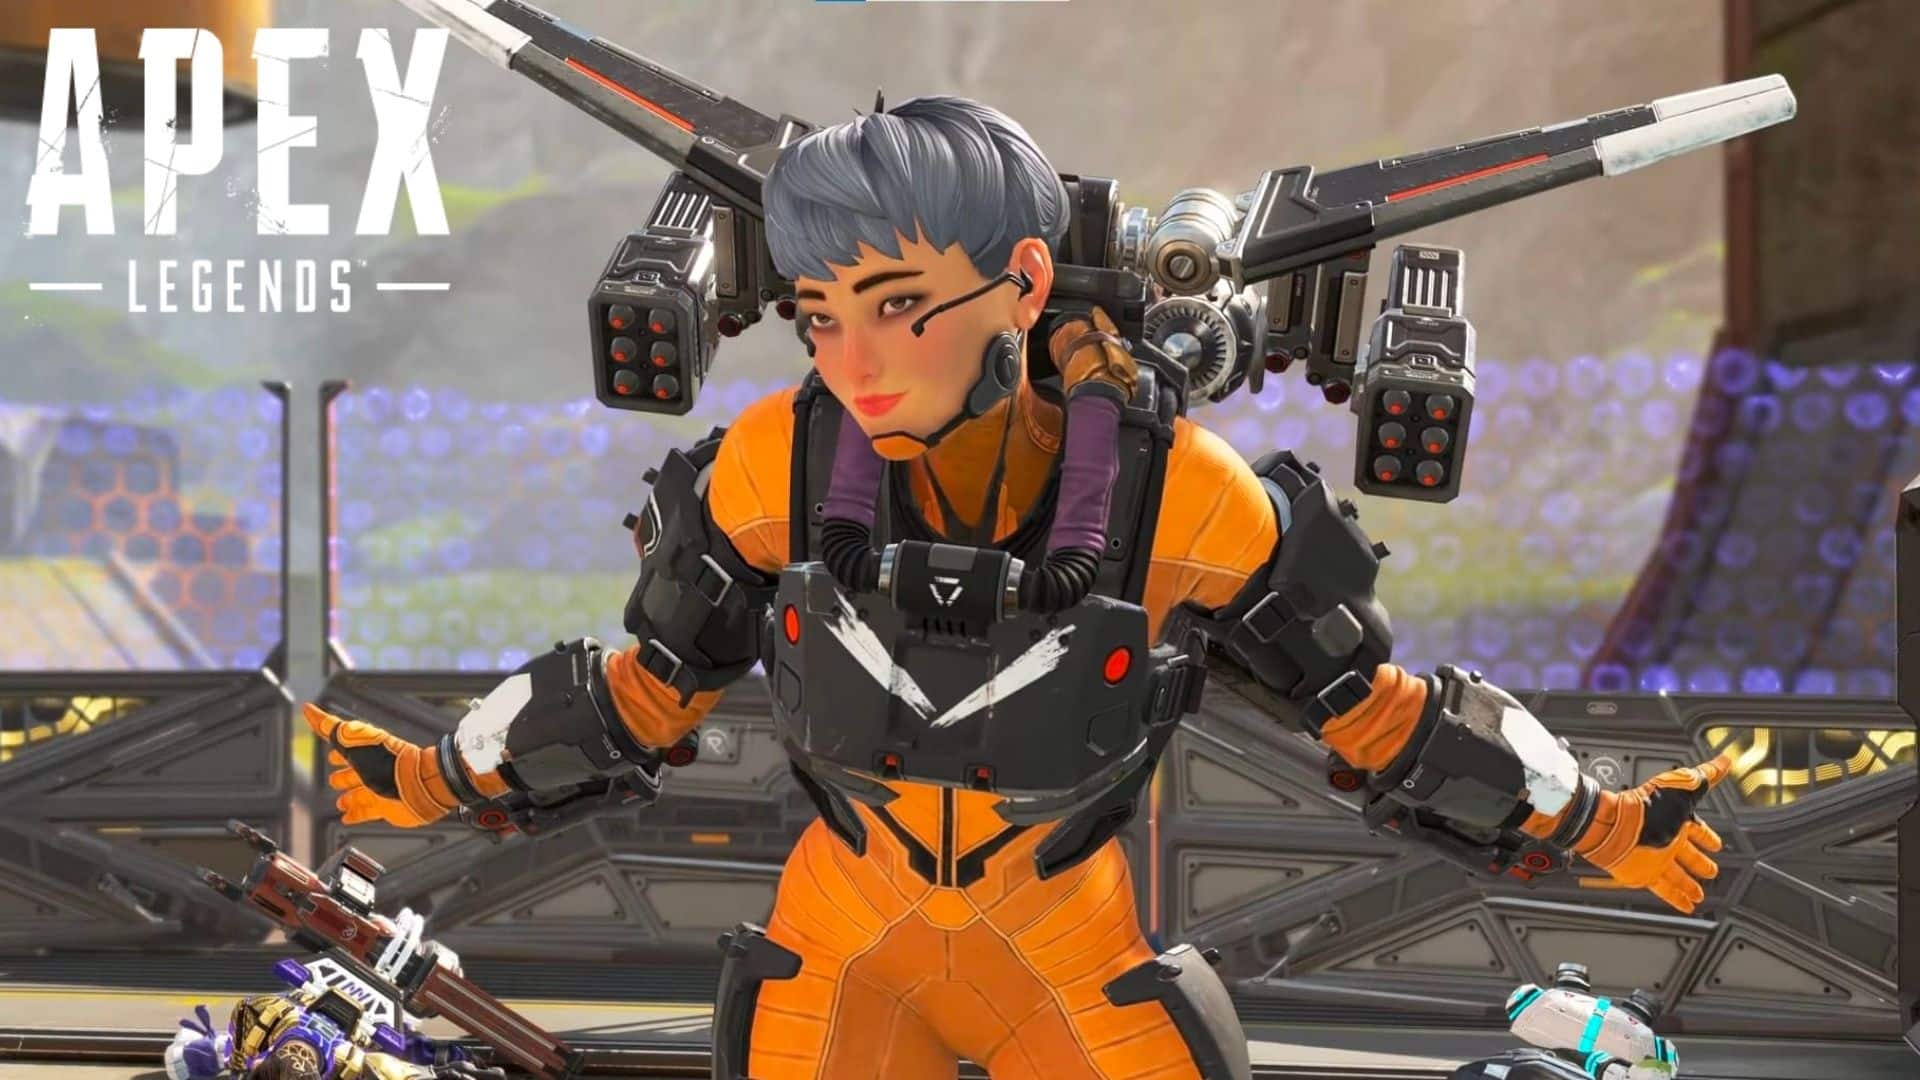 Valkyrie in Apex Legends with her jets